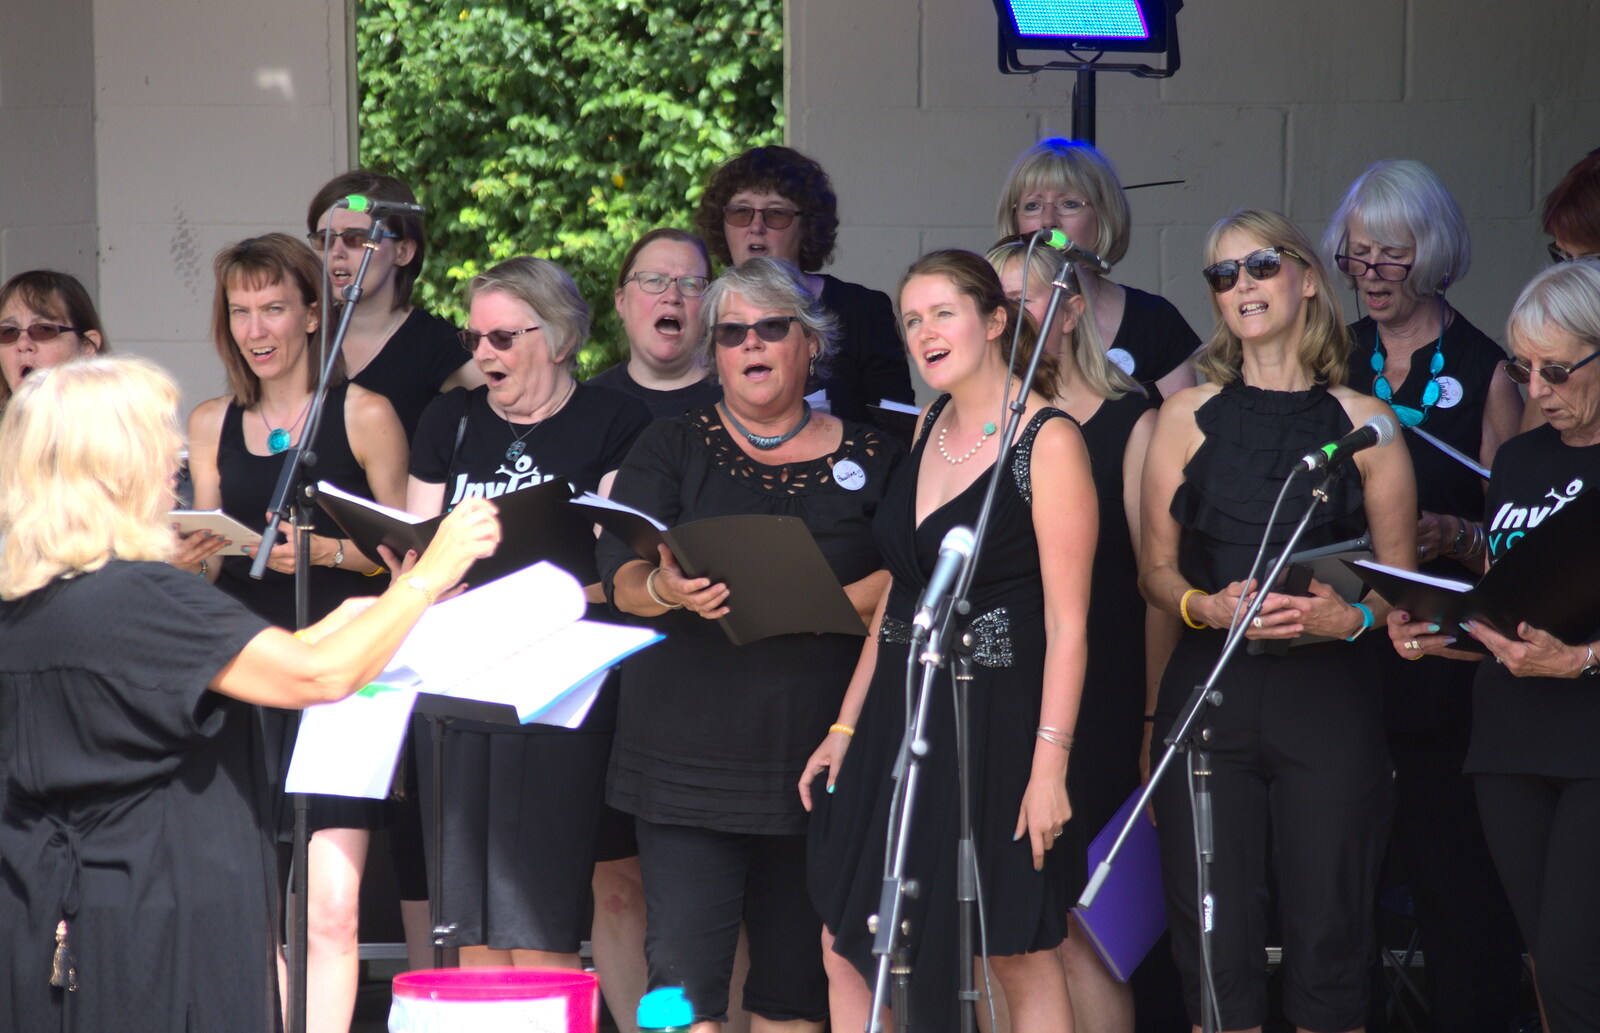 Isobel centre gives it some from Diss Fest, The Park, Diss, Norfolk - 22nd July 2018